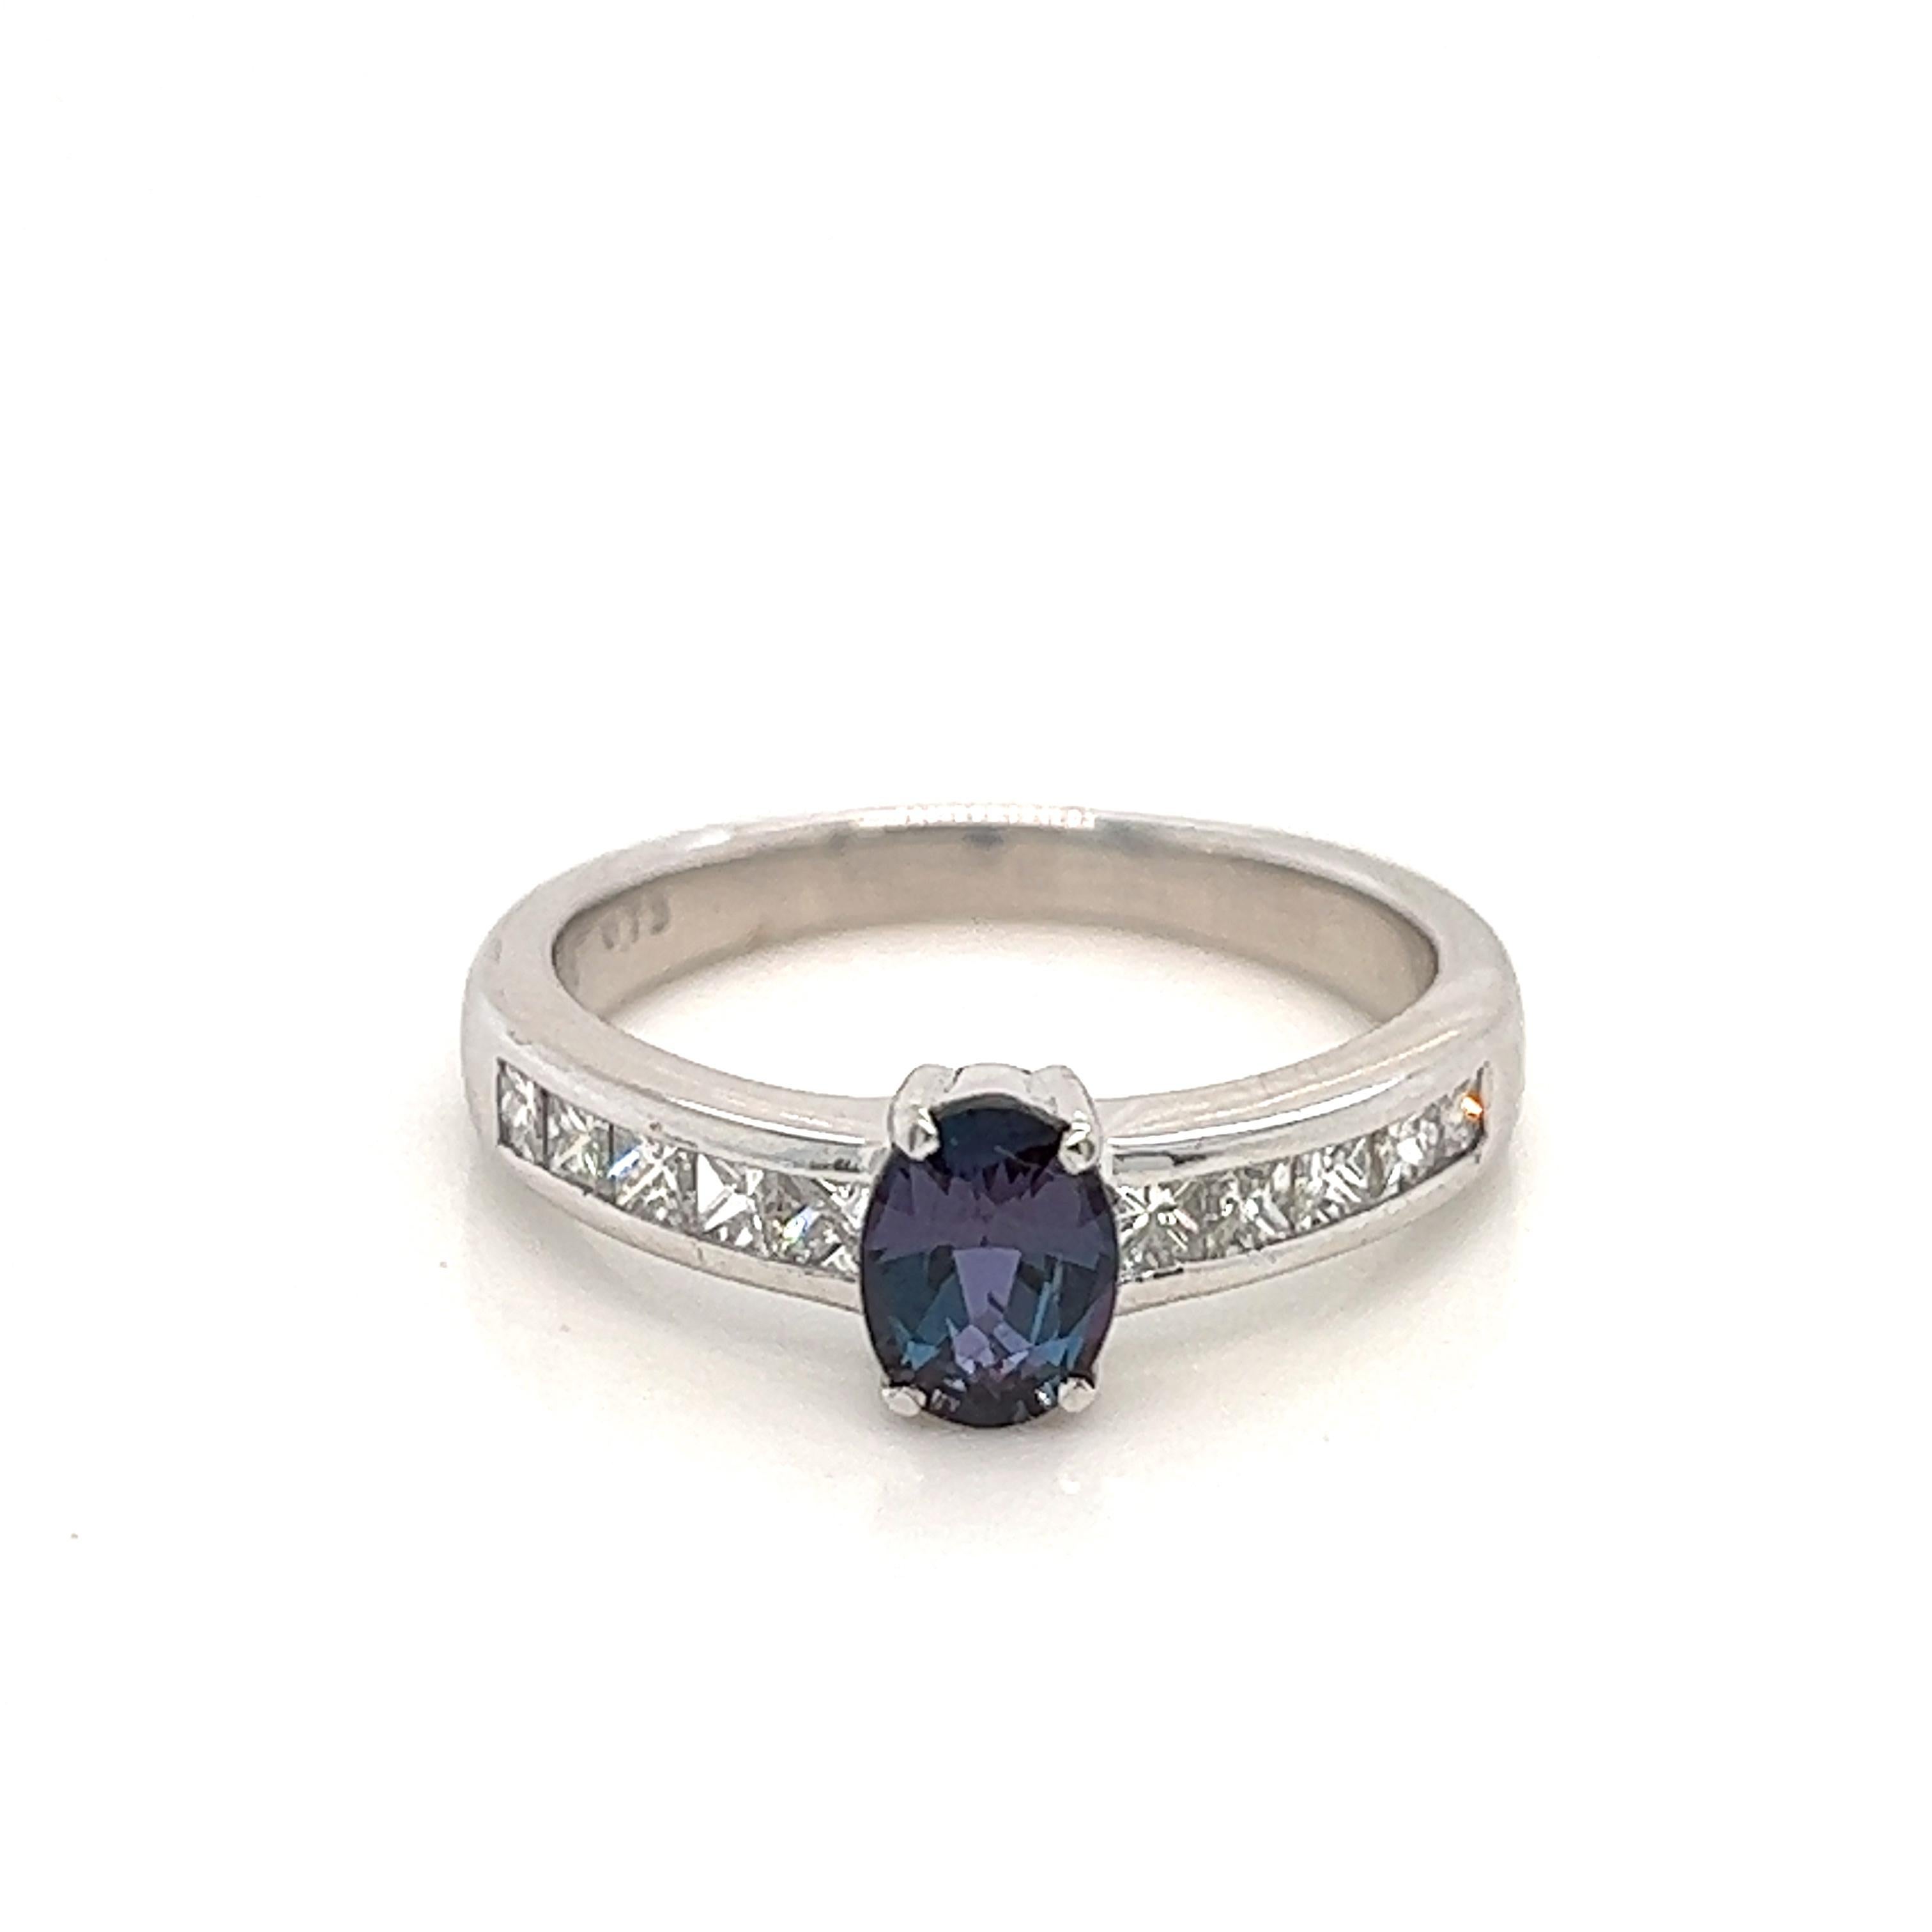 This is a gorgeous natural AAA quality oval Alexandrite surrounded by dainty diamonds that is set in a vintage platinum setting. This ring features a natural 0.73 carat oval alexandrite that is certified by the Gemological Institute of America (GIA)